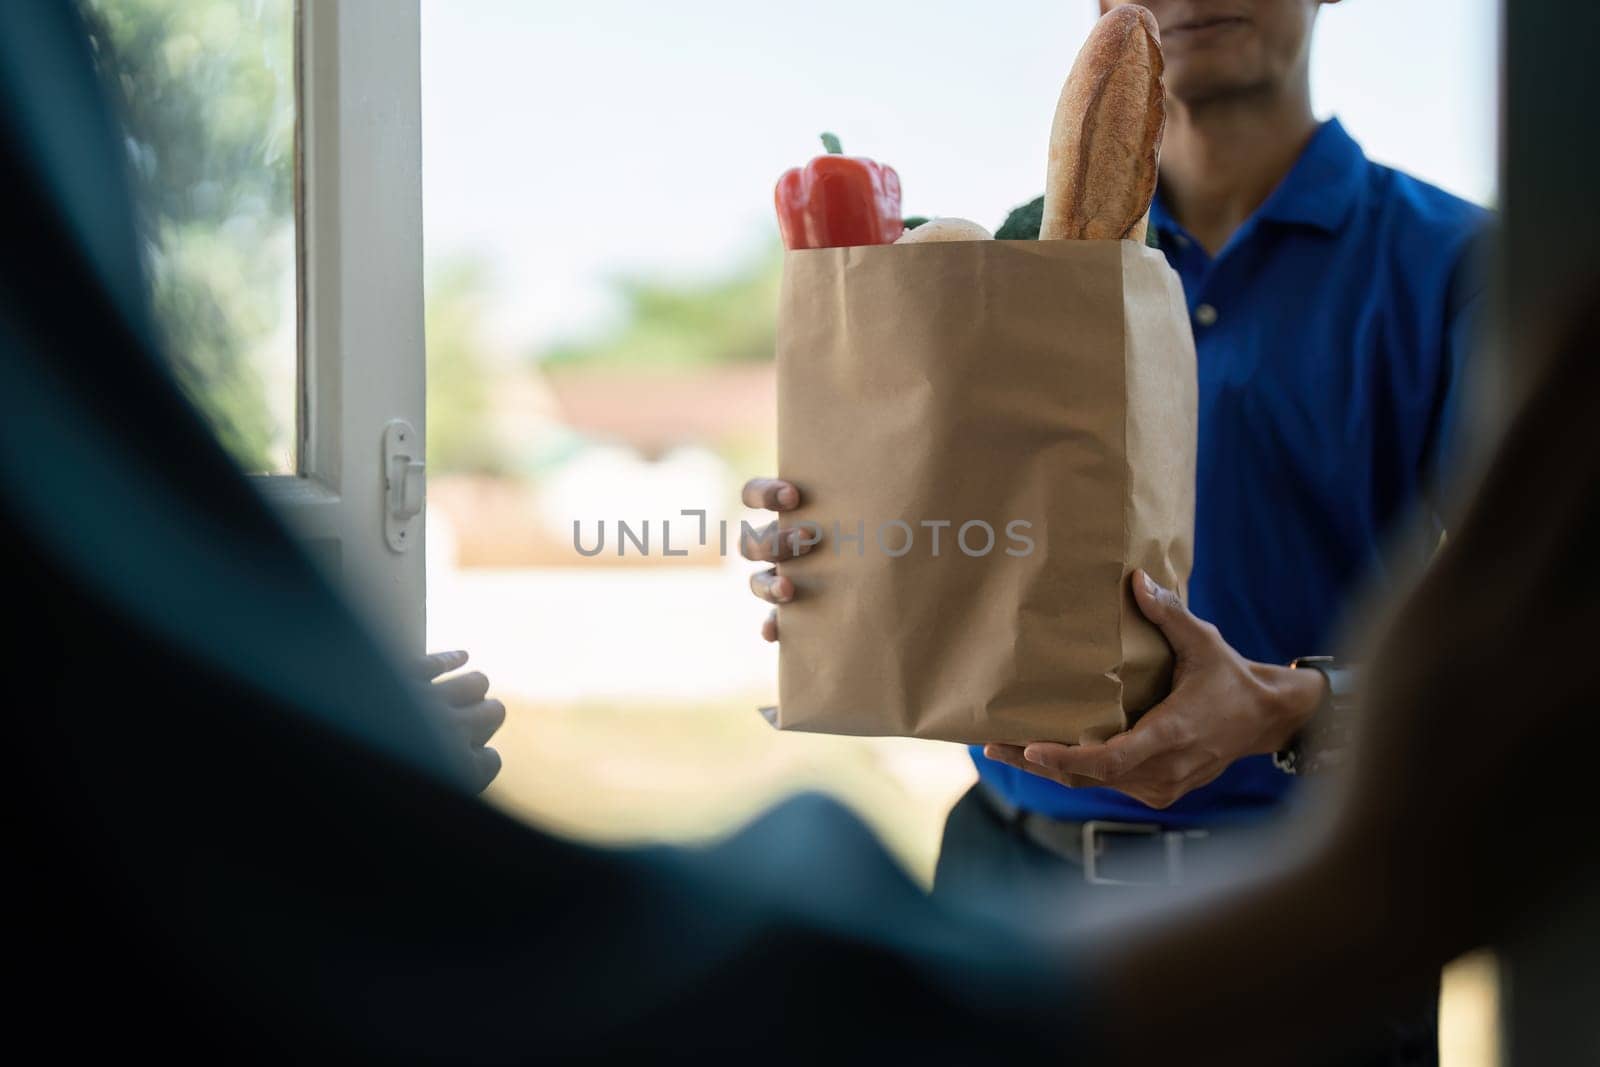 A delivery person handing over a paper bag filled with groceries at a doorstep, representing contactless delivery service during the pandemic.